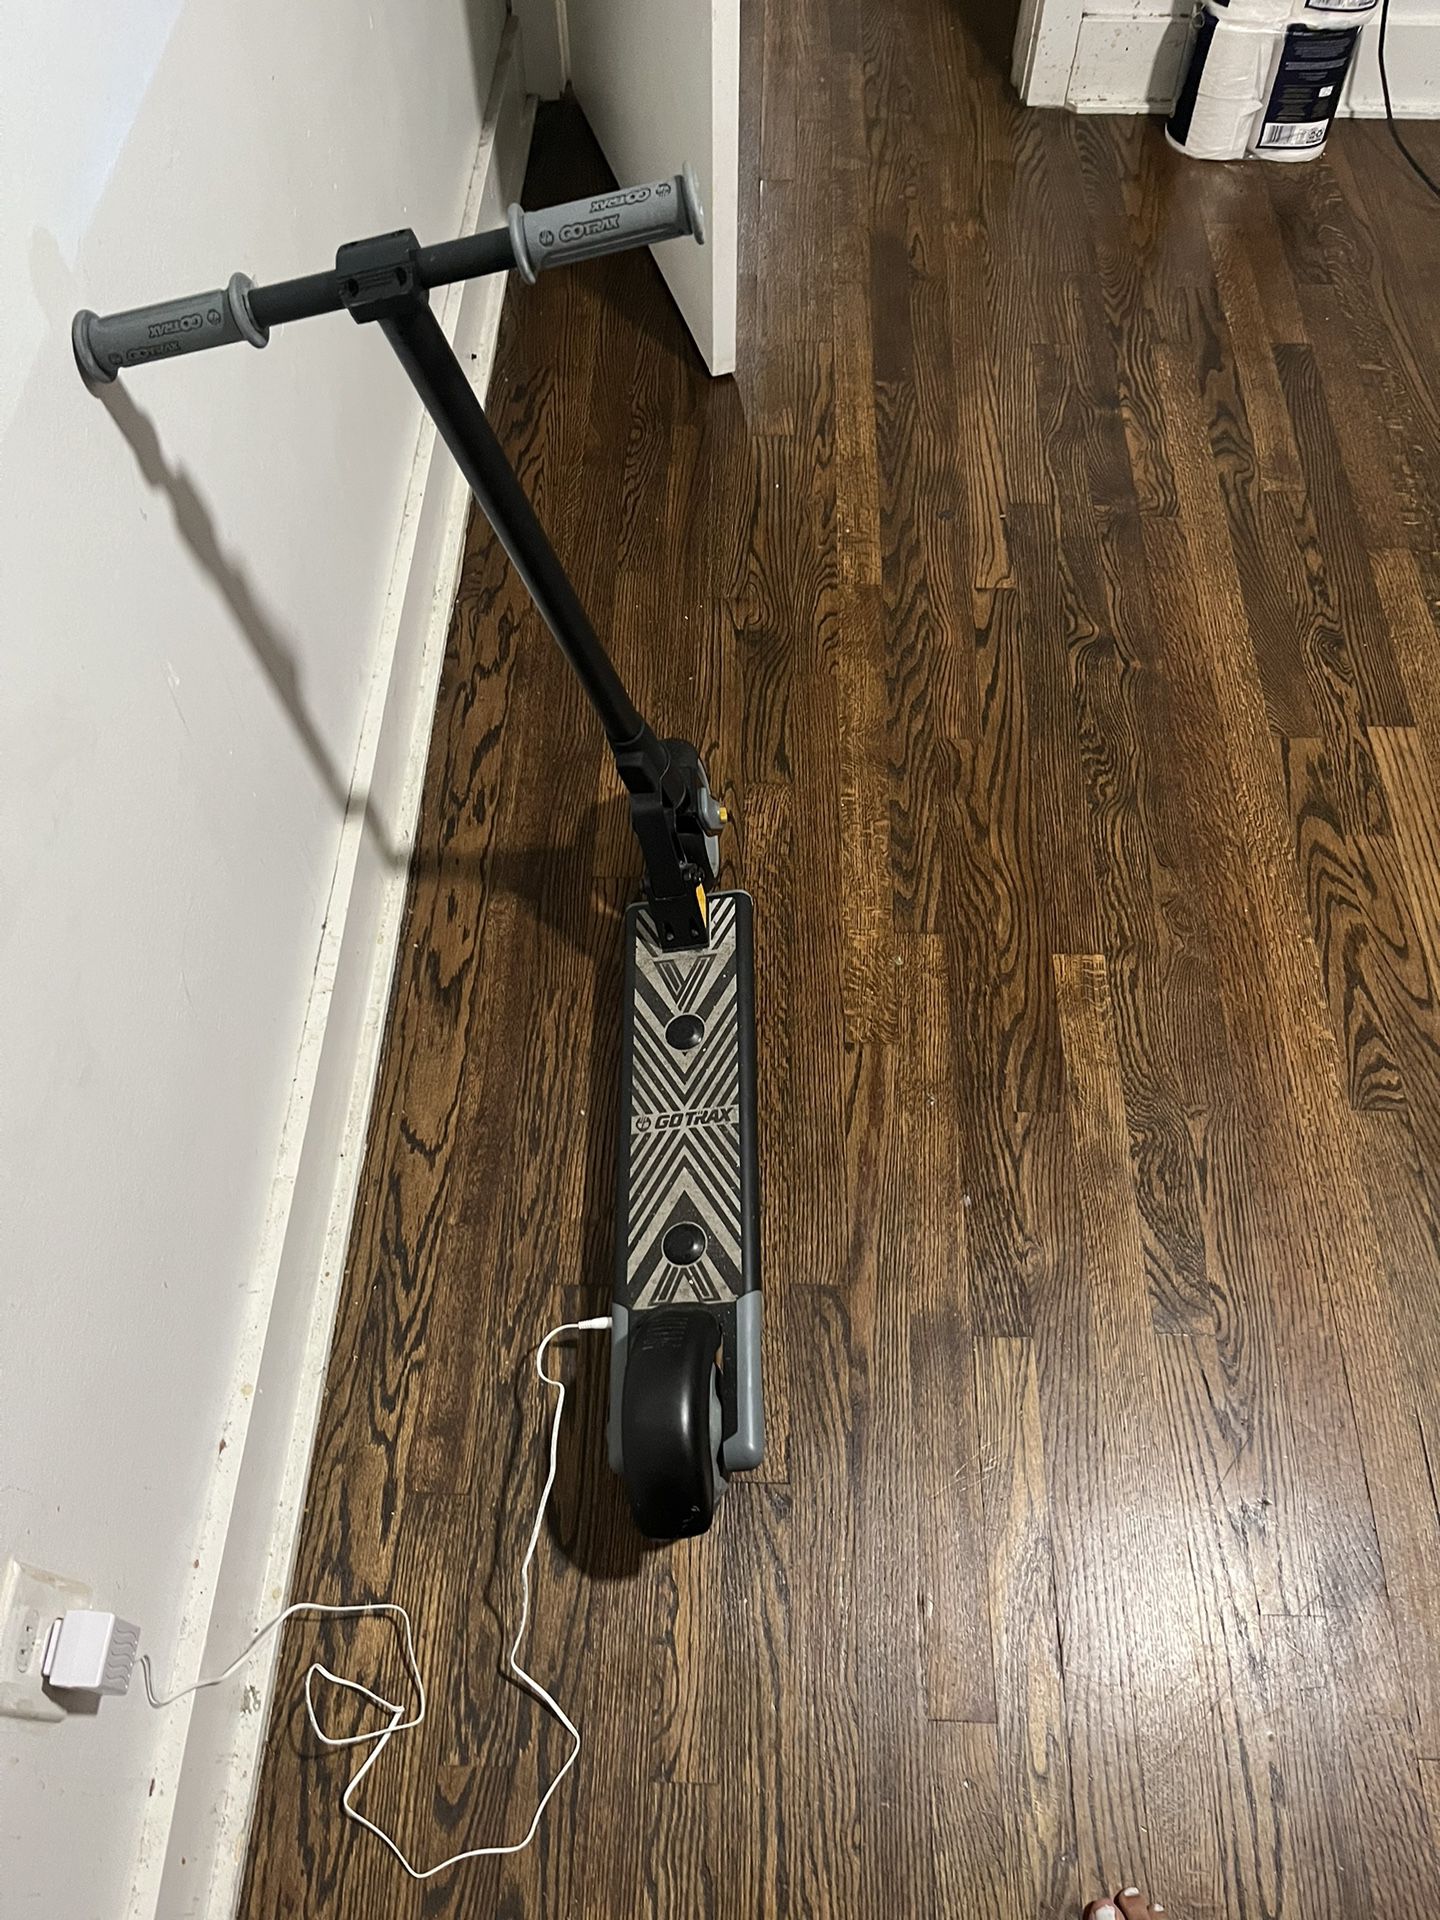  Gotraxs kids electrical scooter 